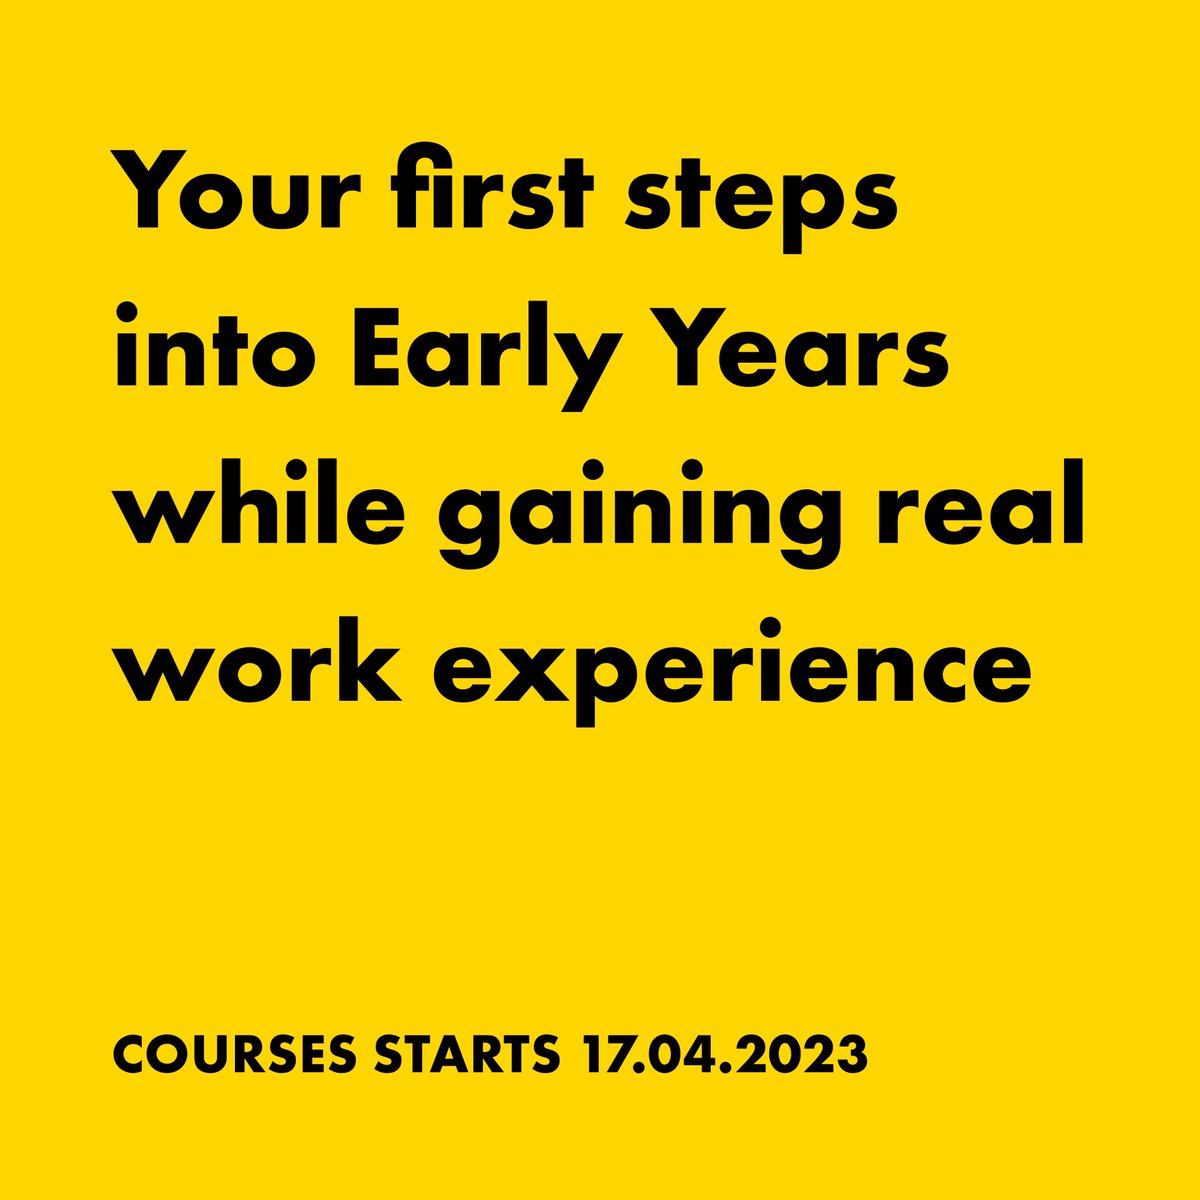 🧠 Connecting with Early Years 

Our #EarlyYears Pre Apprenticeship programme starts soon, preparing you to take the first steps into Early Years & gain valuable work experience!

📍 North Lanarkshire
📅 17 April 2023

Contact tigers now to apply!

#InspiringPotential